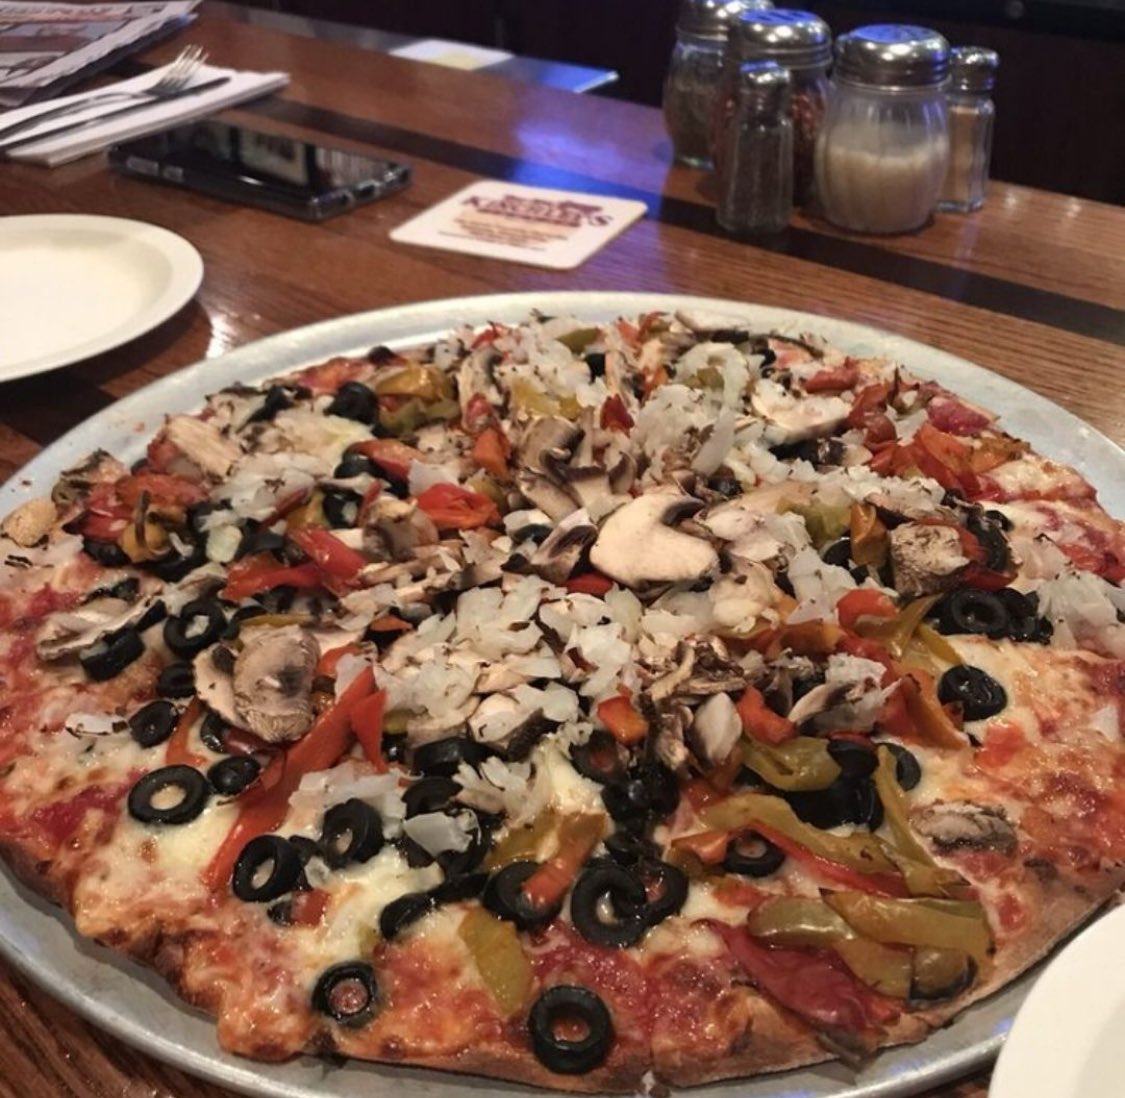 Since we first opened our doors, we've become synonymous with quality & tradition. We've been serving the communities of Bergen & Rockland Counties (& beyond) our family recipe for ultra-thin crust pizza for over 85 years. Here's to many more years to come! #Kinchleys #Pizza